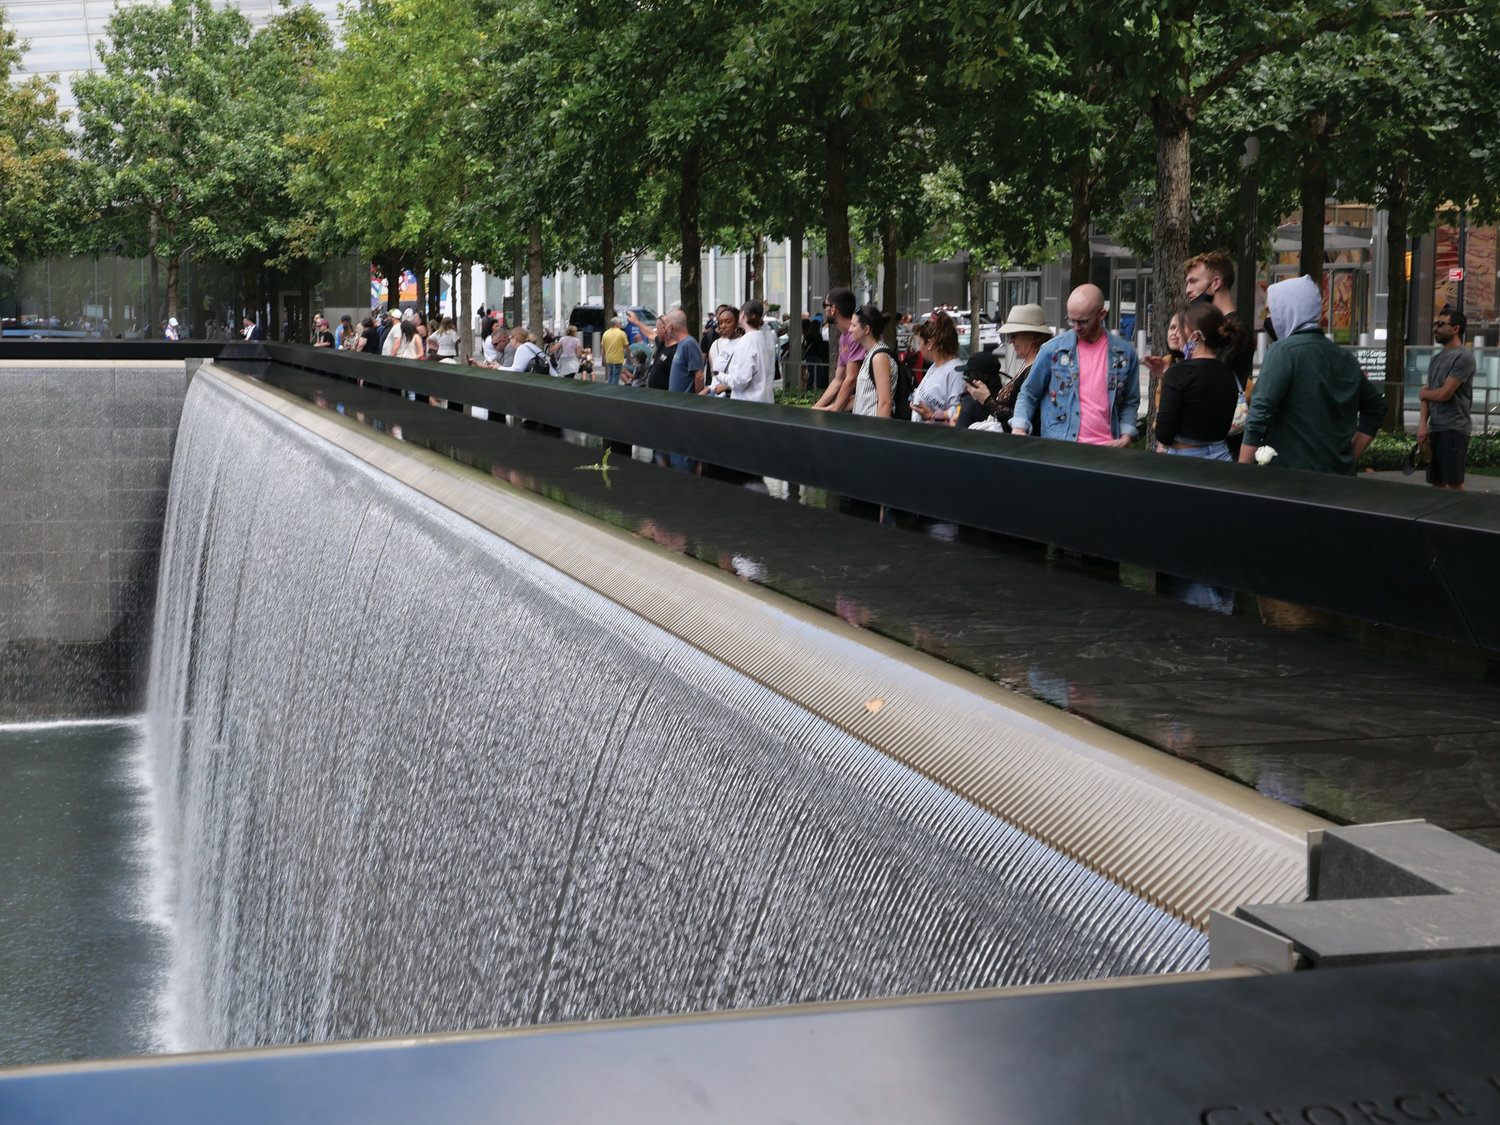 As water falls, guests visit the 9/11 Memorial in lower Manhattan in early September, days before the 20th anniversary of the Sept. 11 attacks.